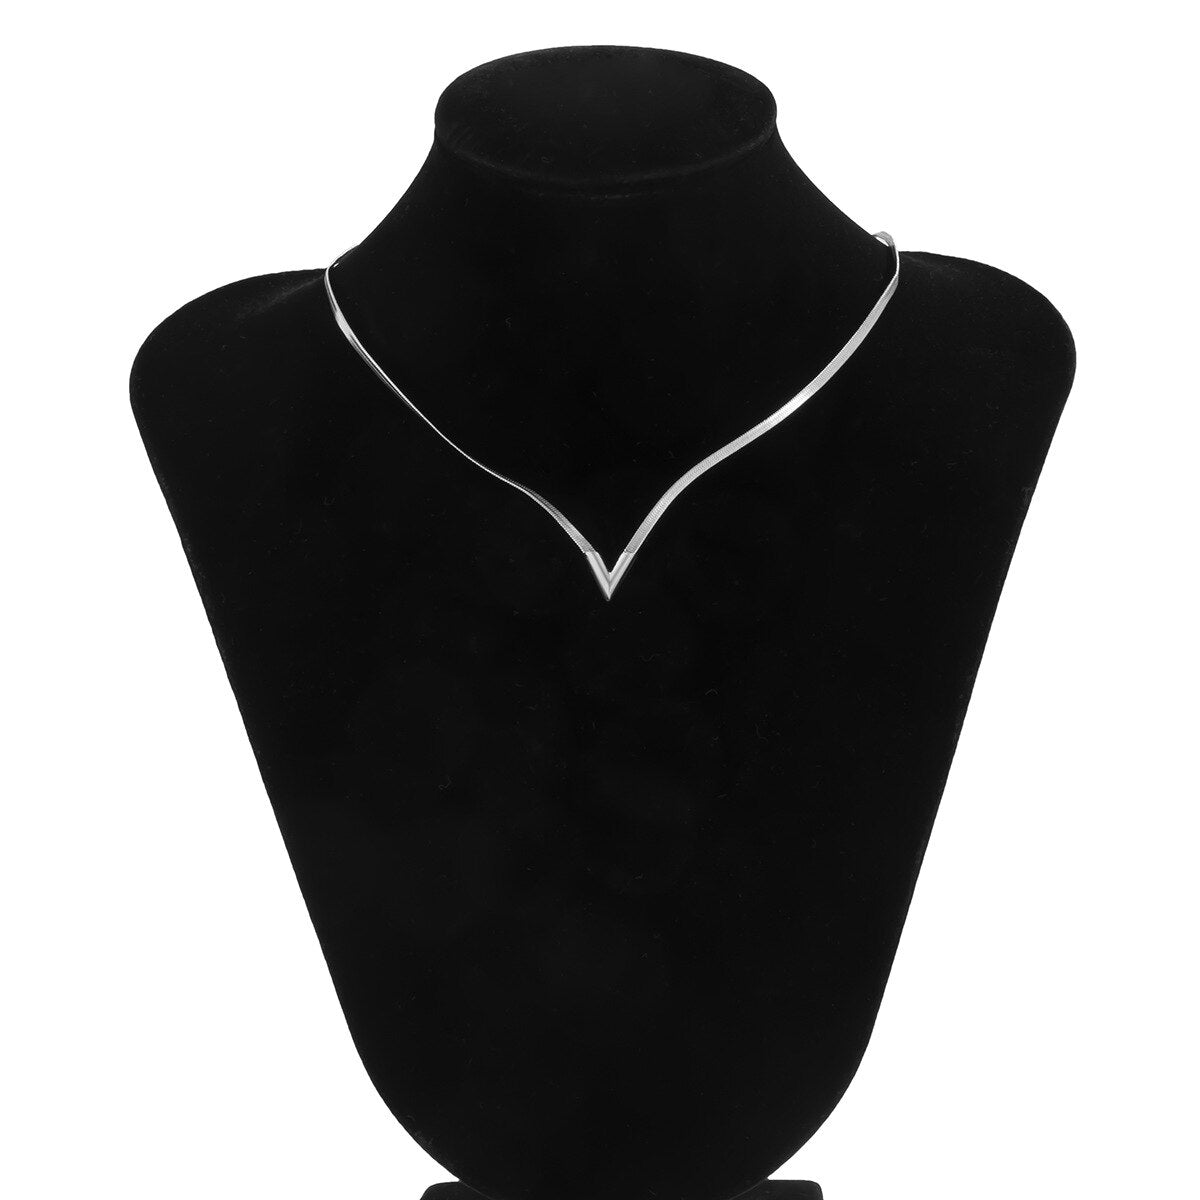 Simple Men's Jewelry Creative V-shaped Necklace